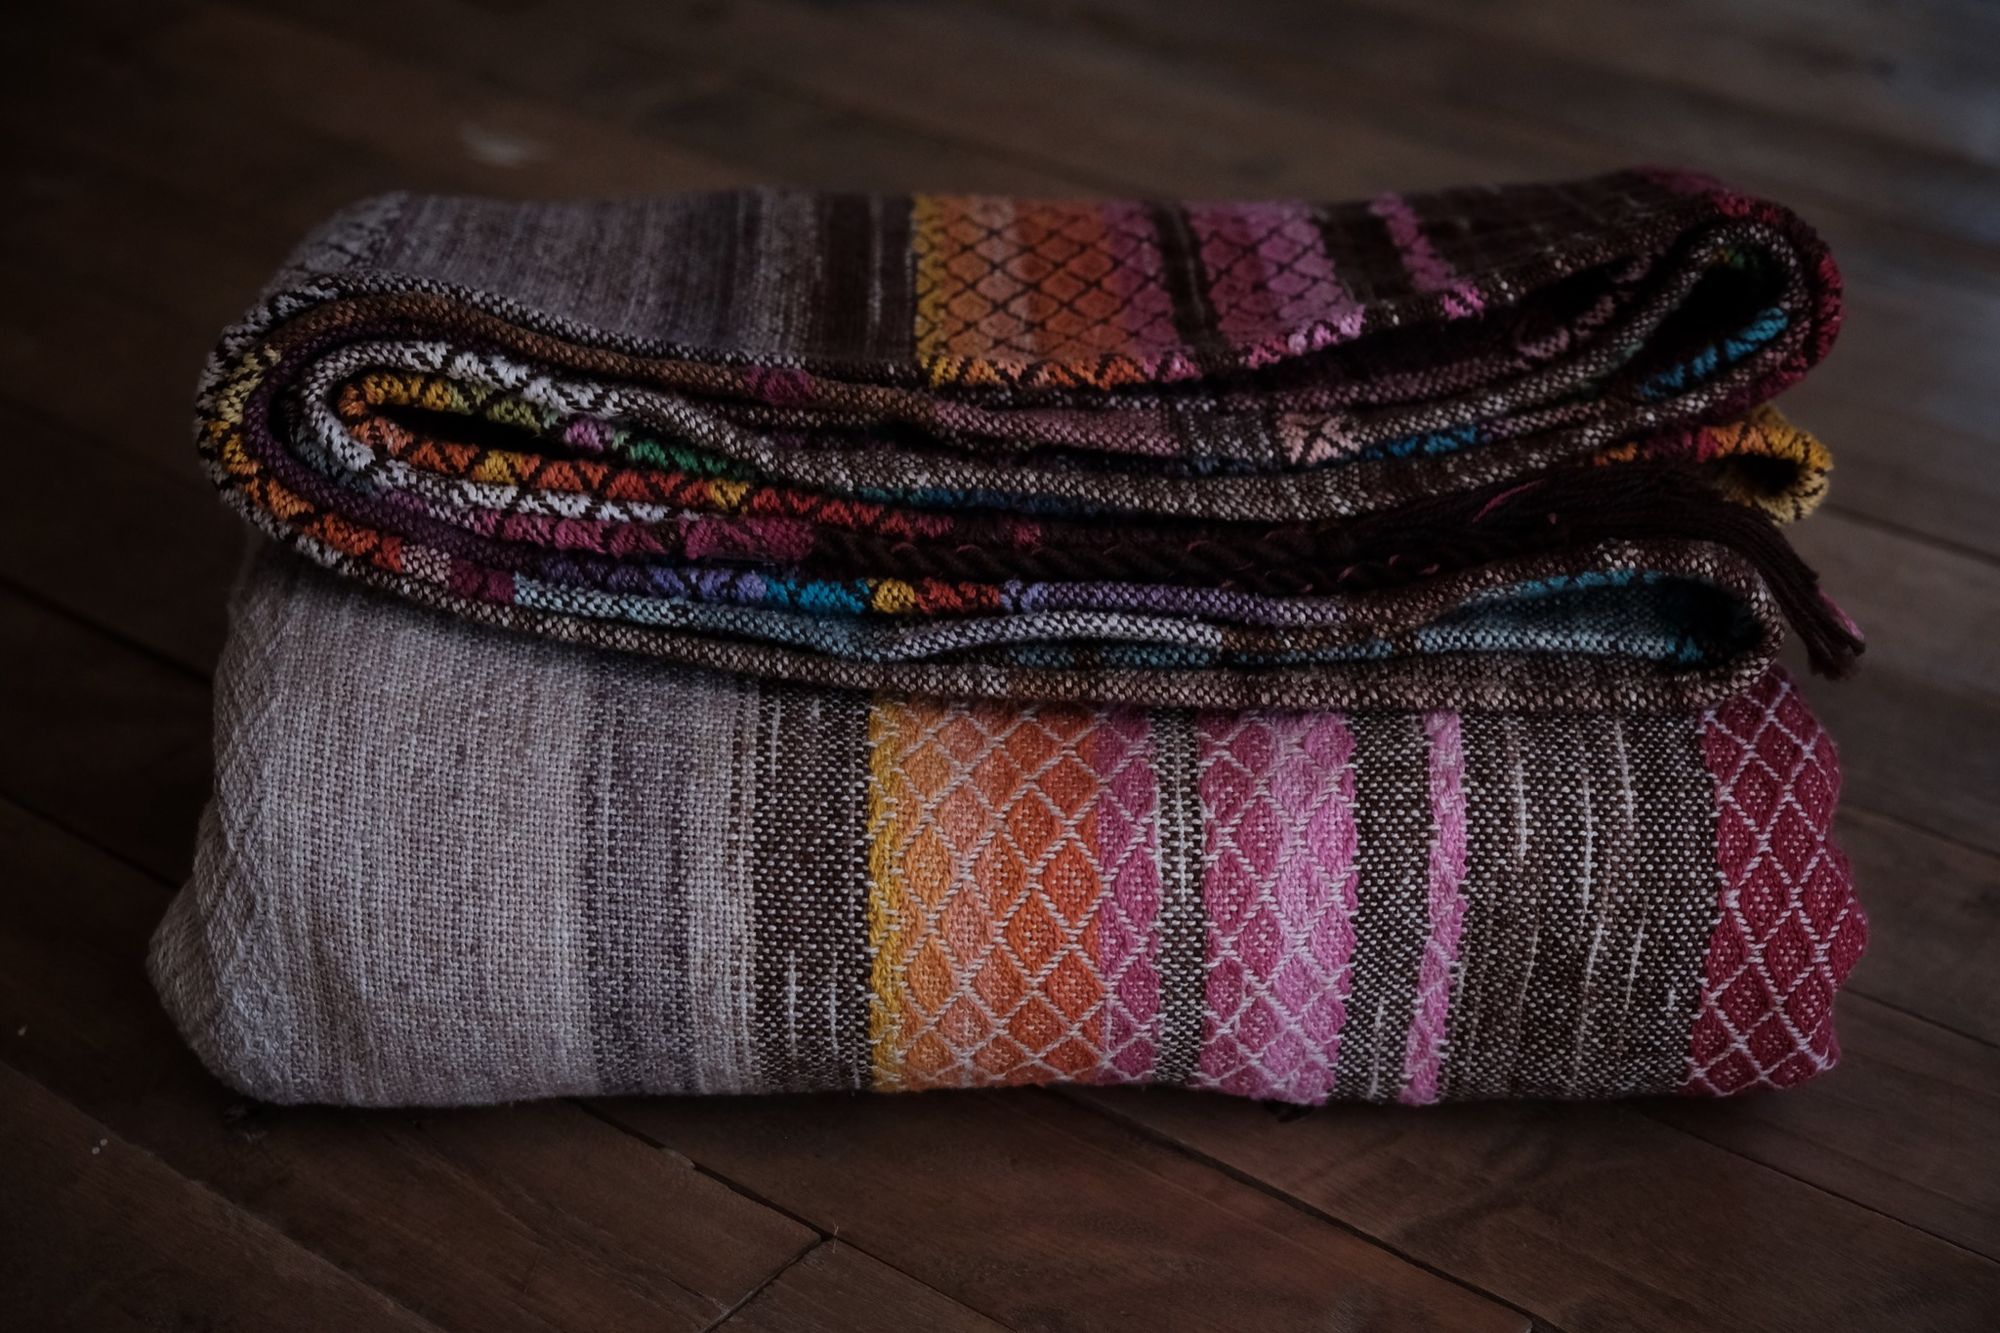 handwoven raw silk fabric woven with a diamond pattern in rainbow, gray, brown and cream colors folded on a wooden floor